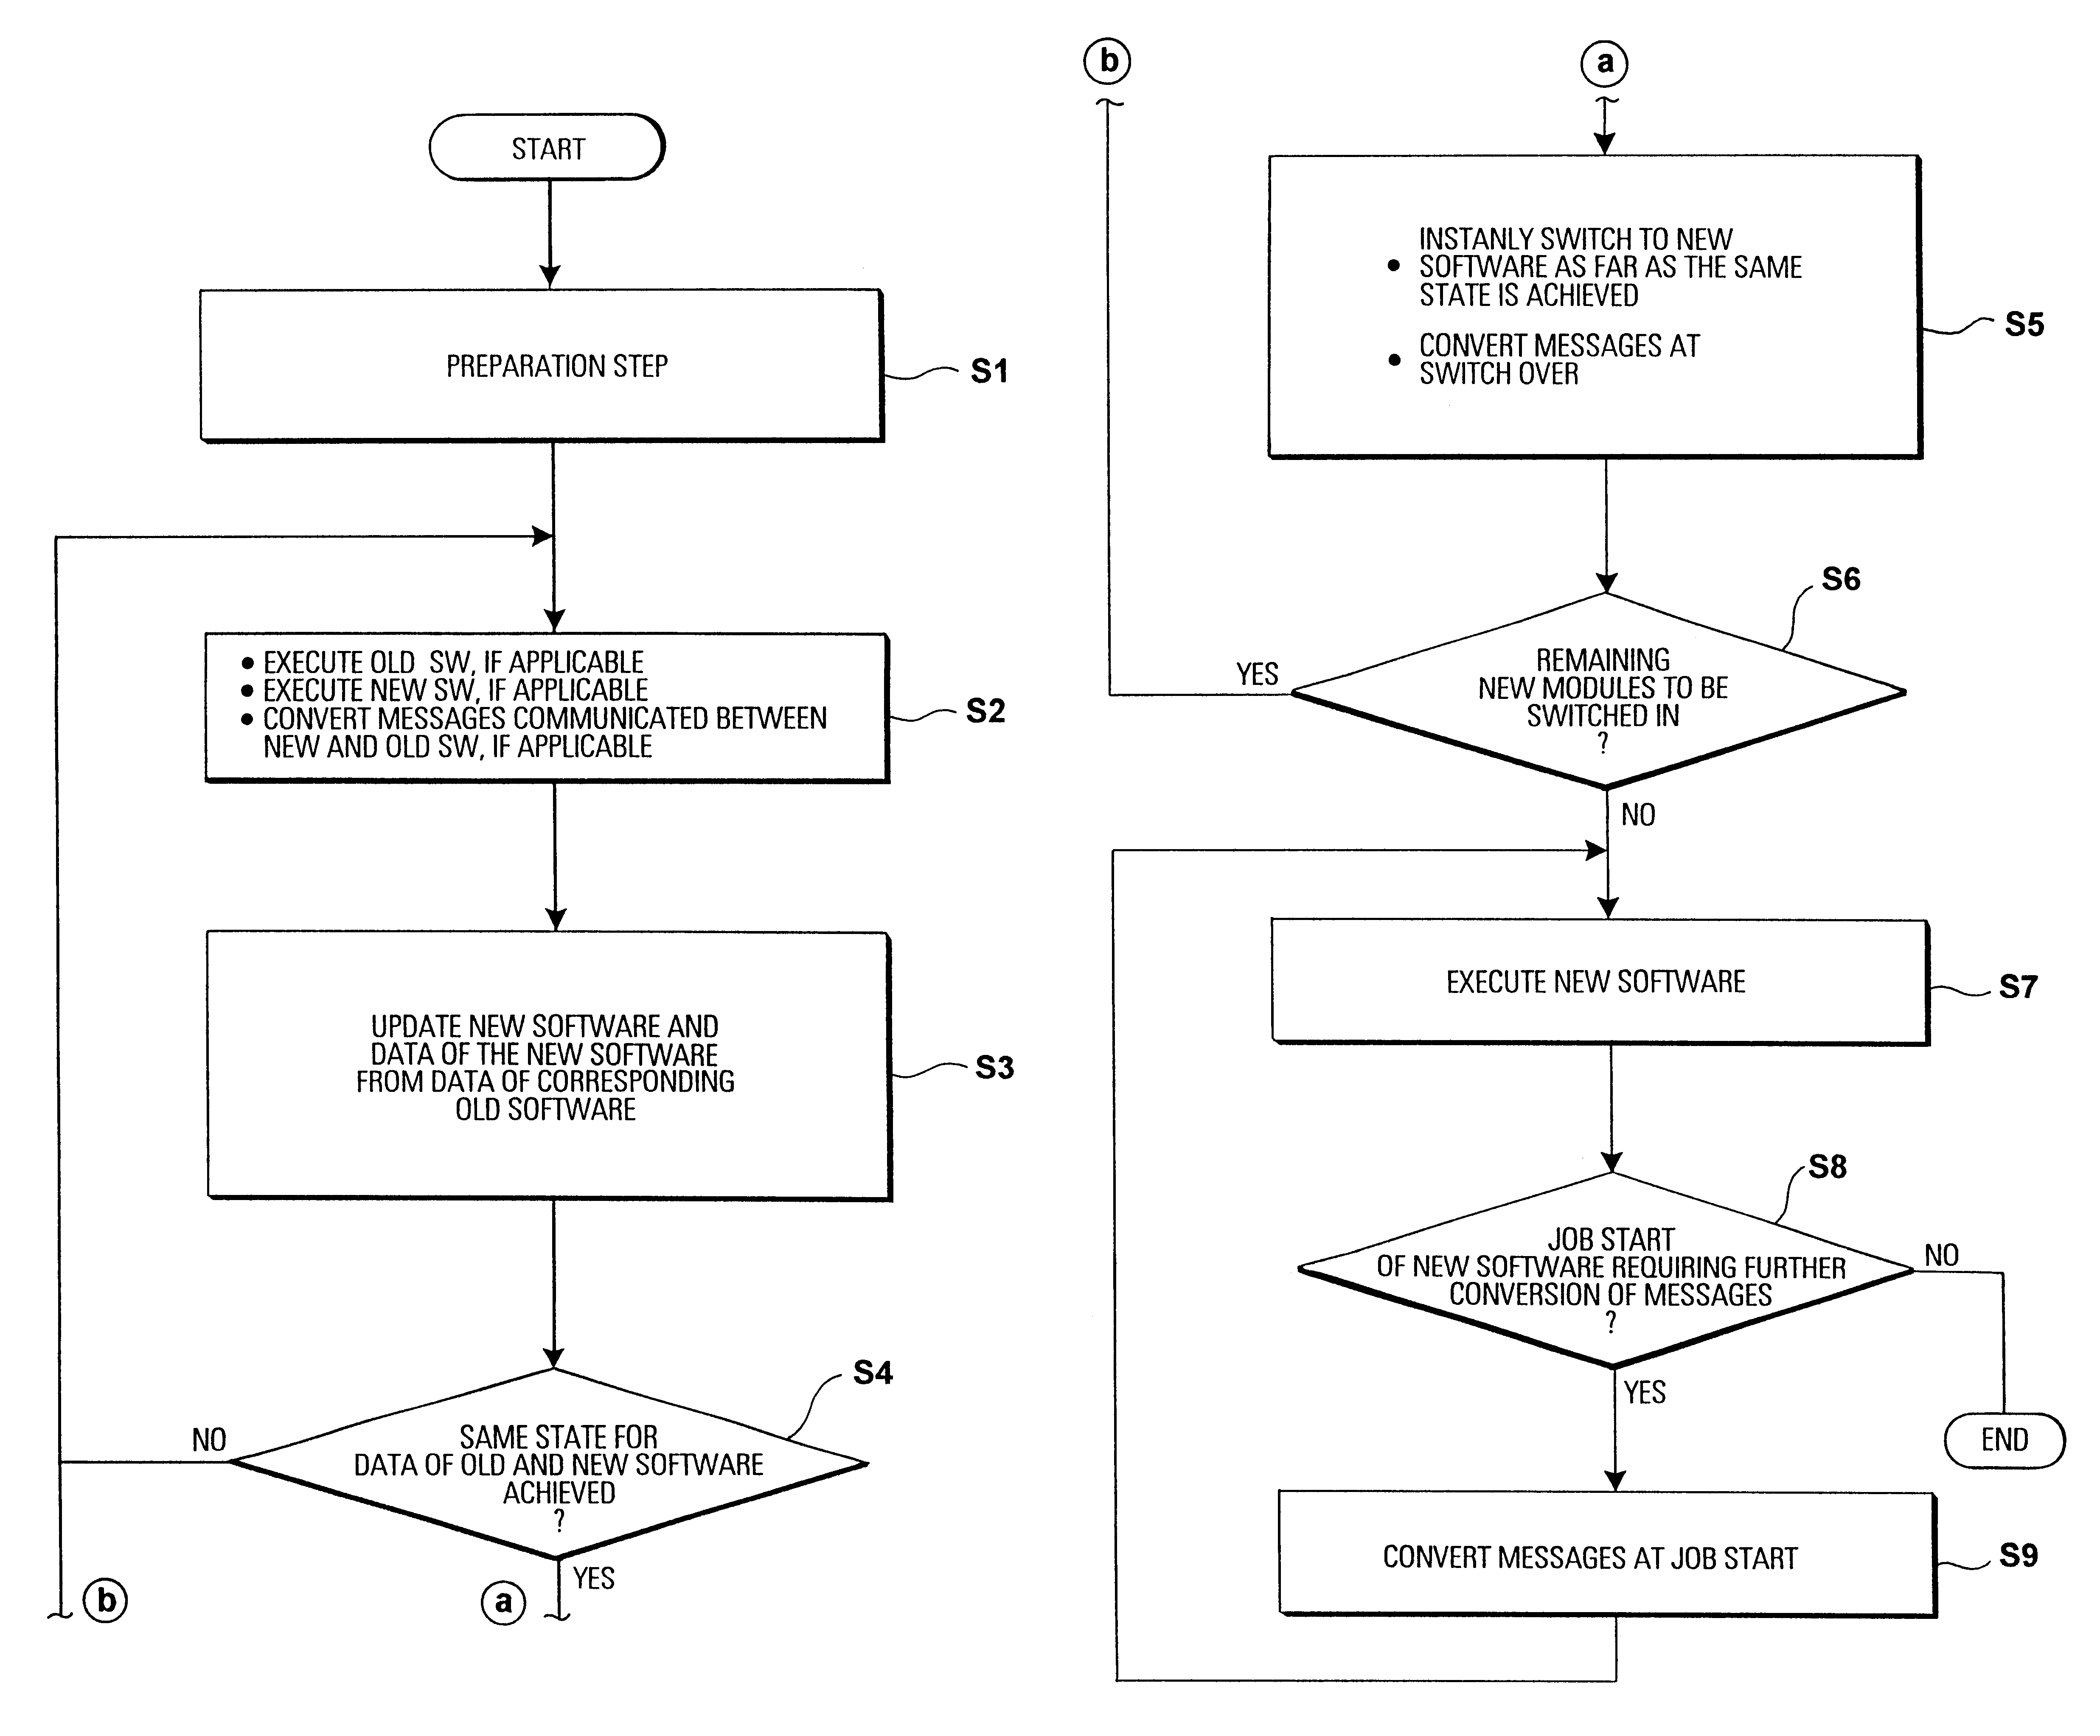 Apparatus and method for conversion of messages